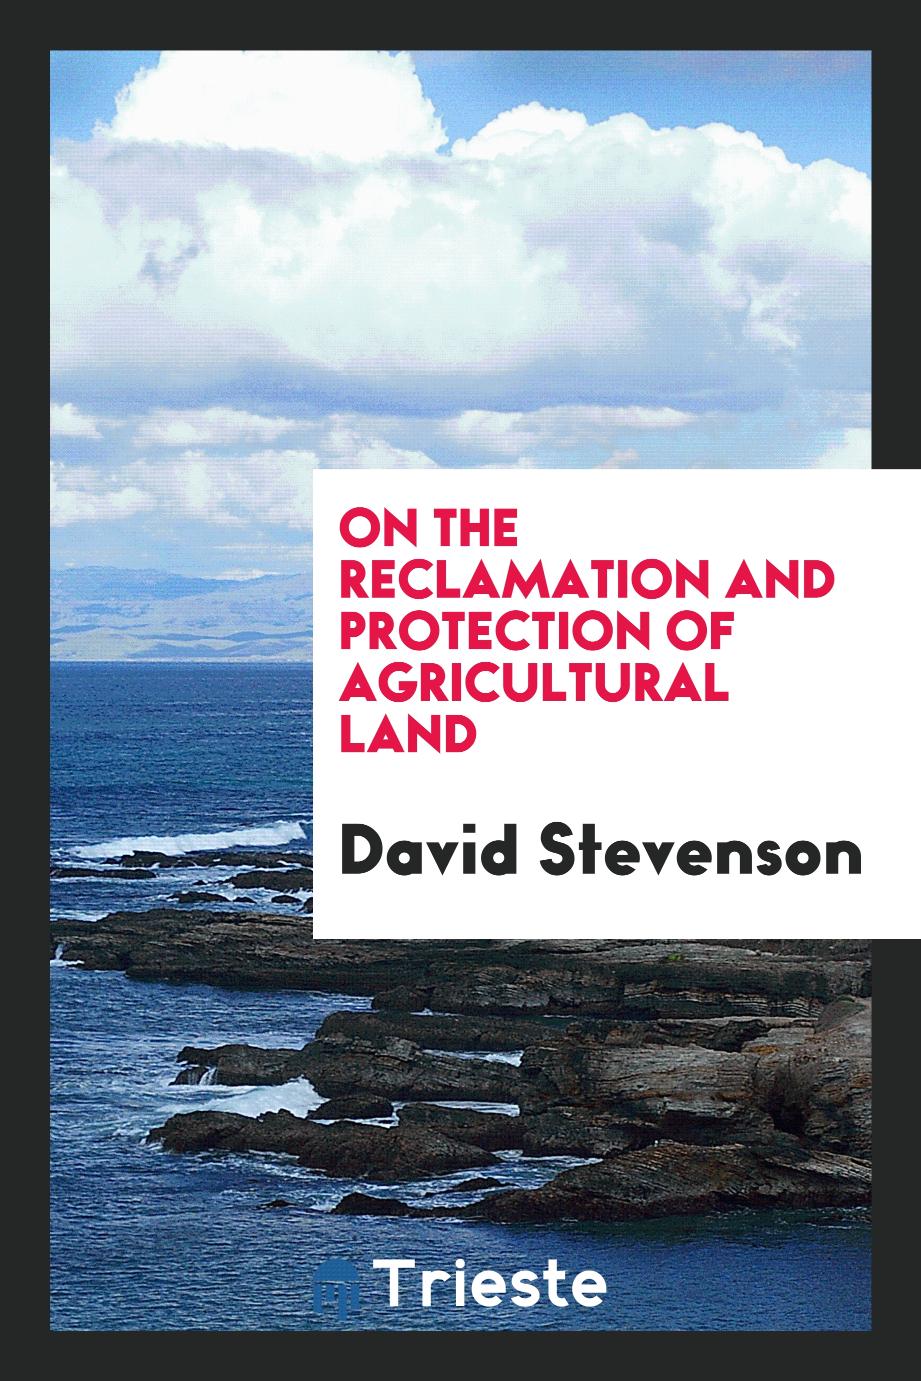 On the reclamation and protection of agricultural land